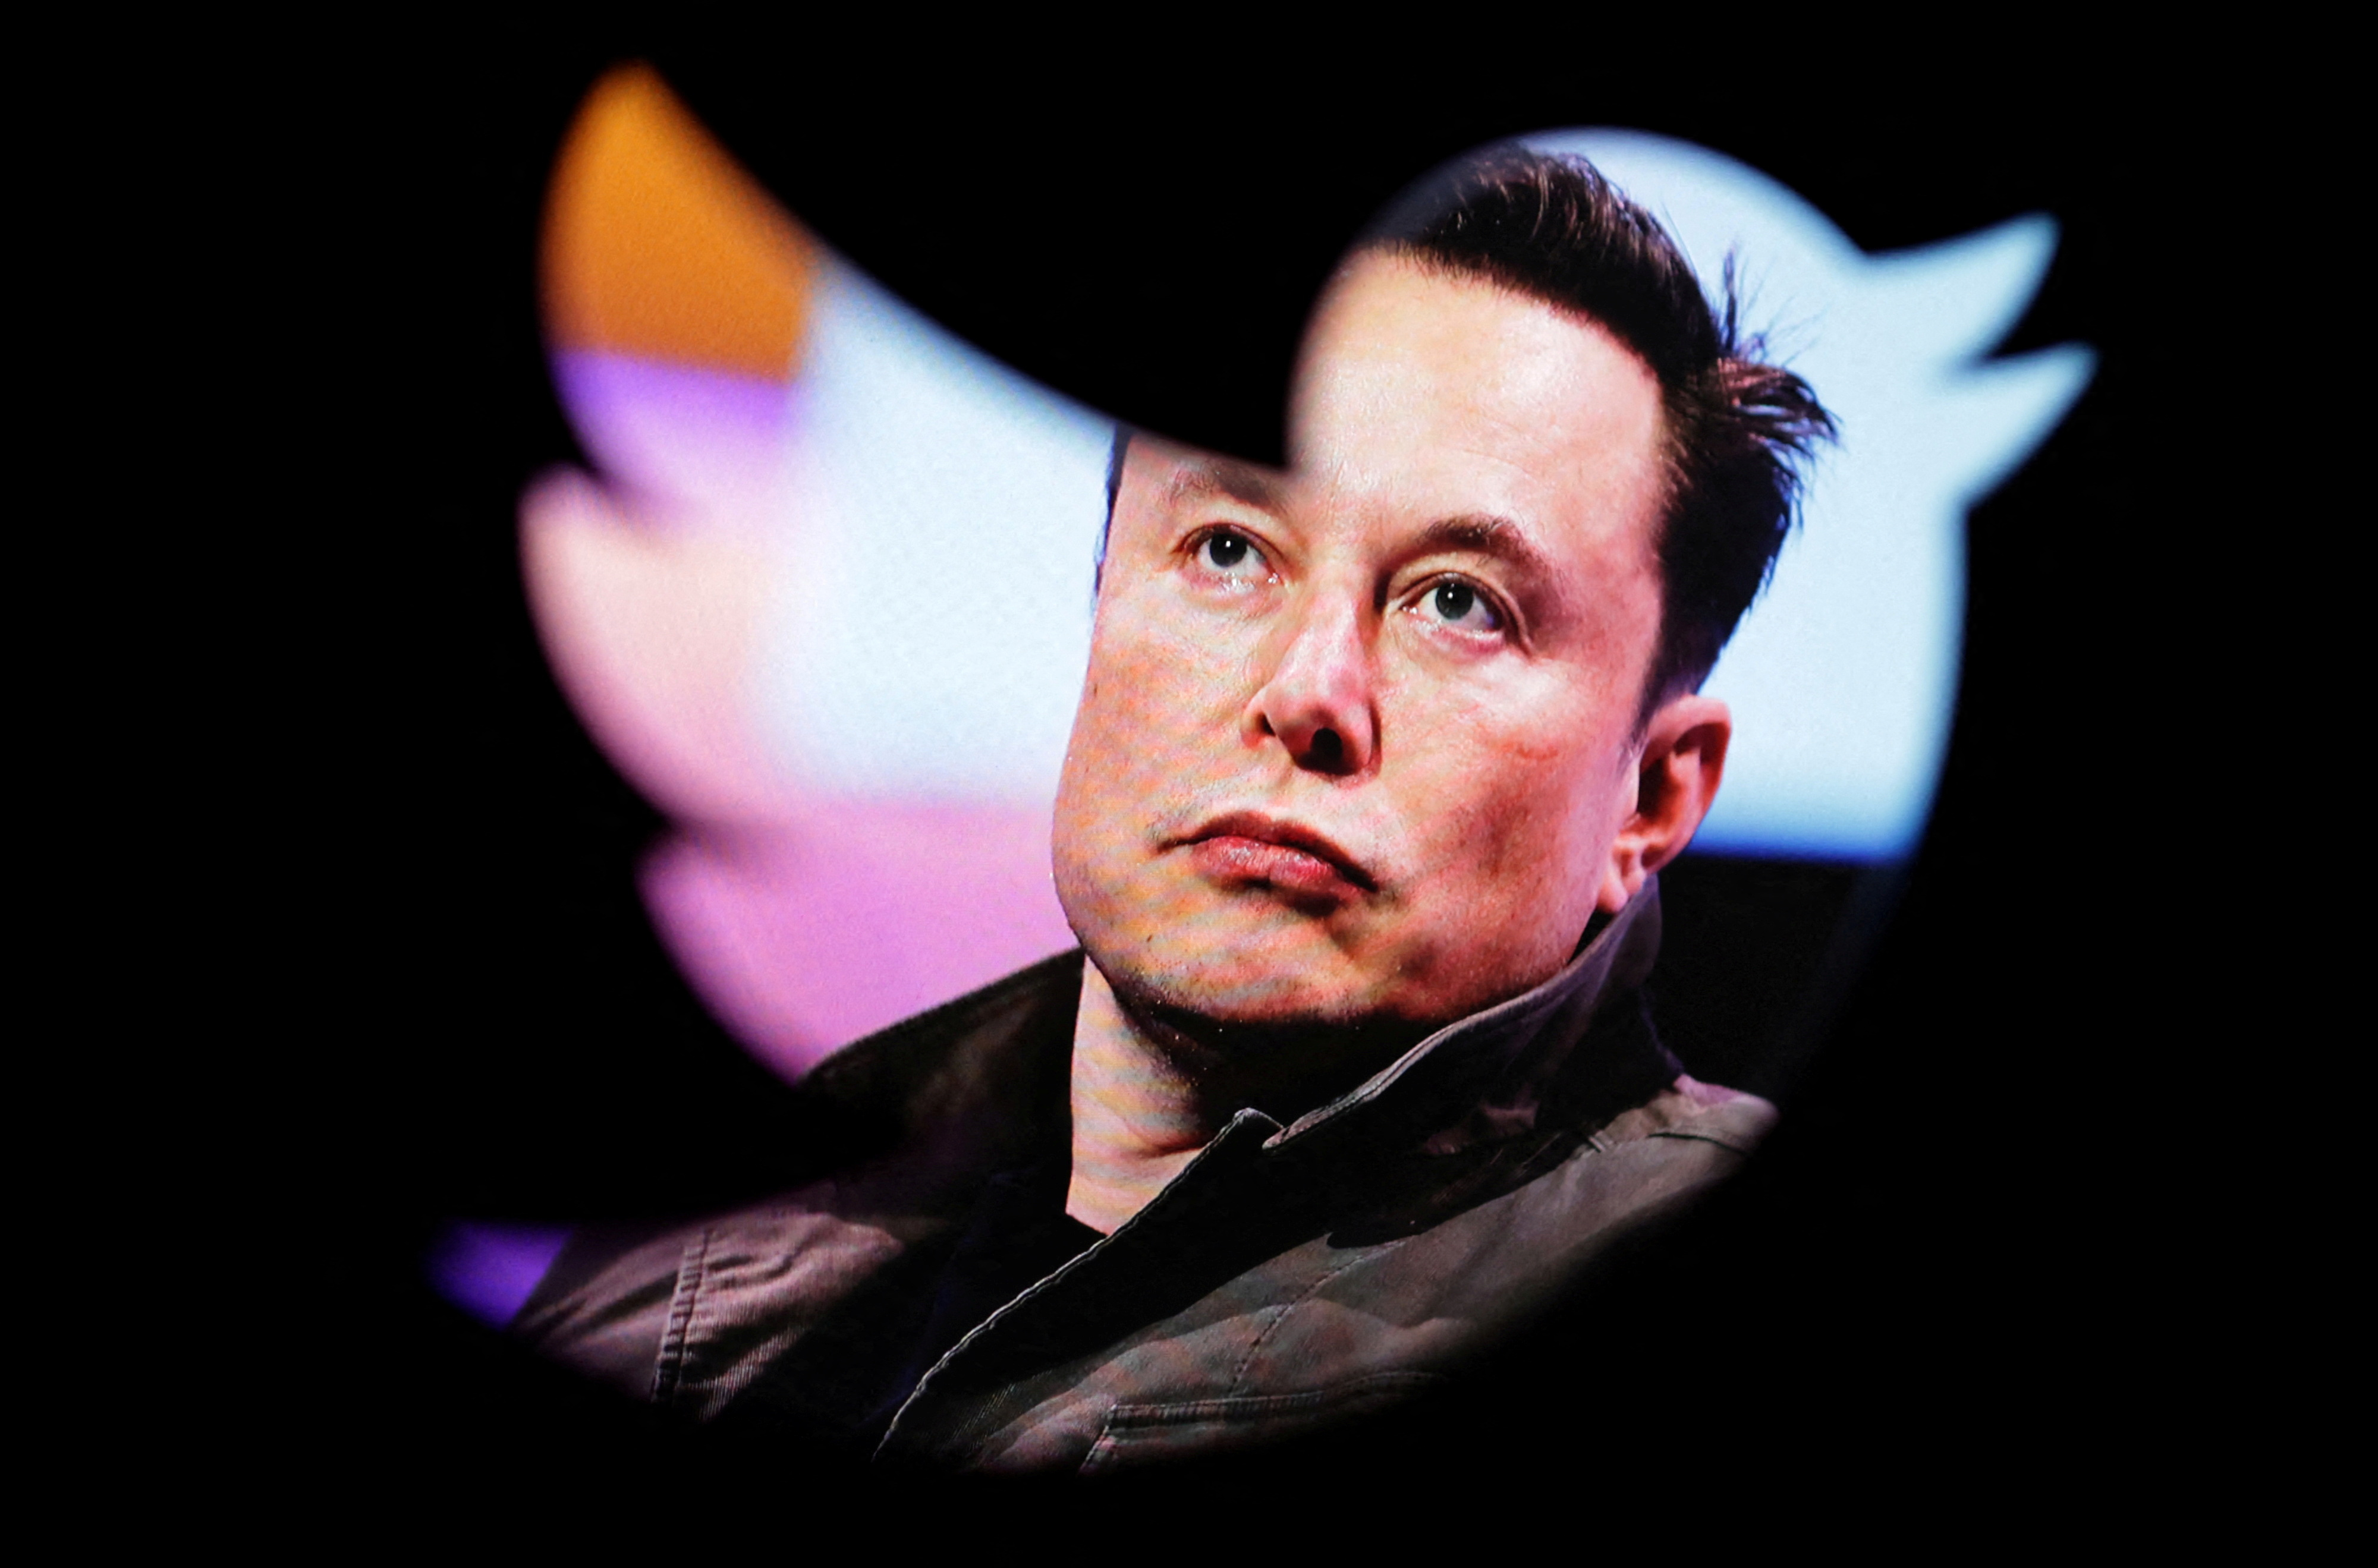 14 celebrities who got cancelled in 2022, from Elon Musk's Twitter